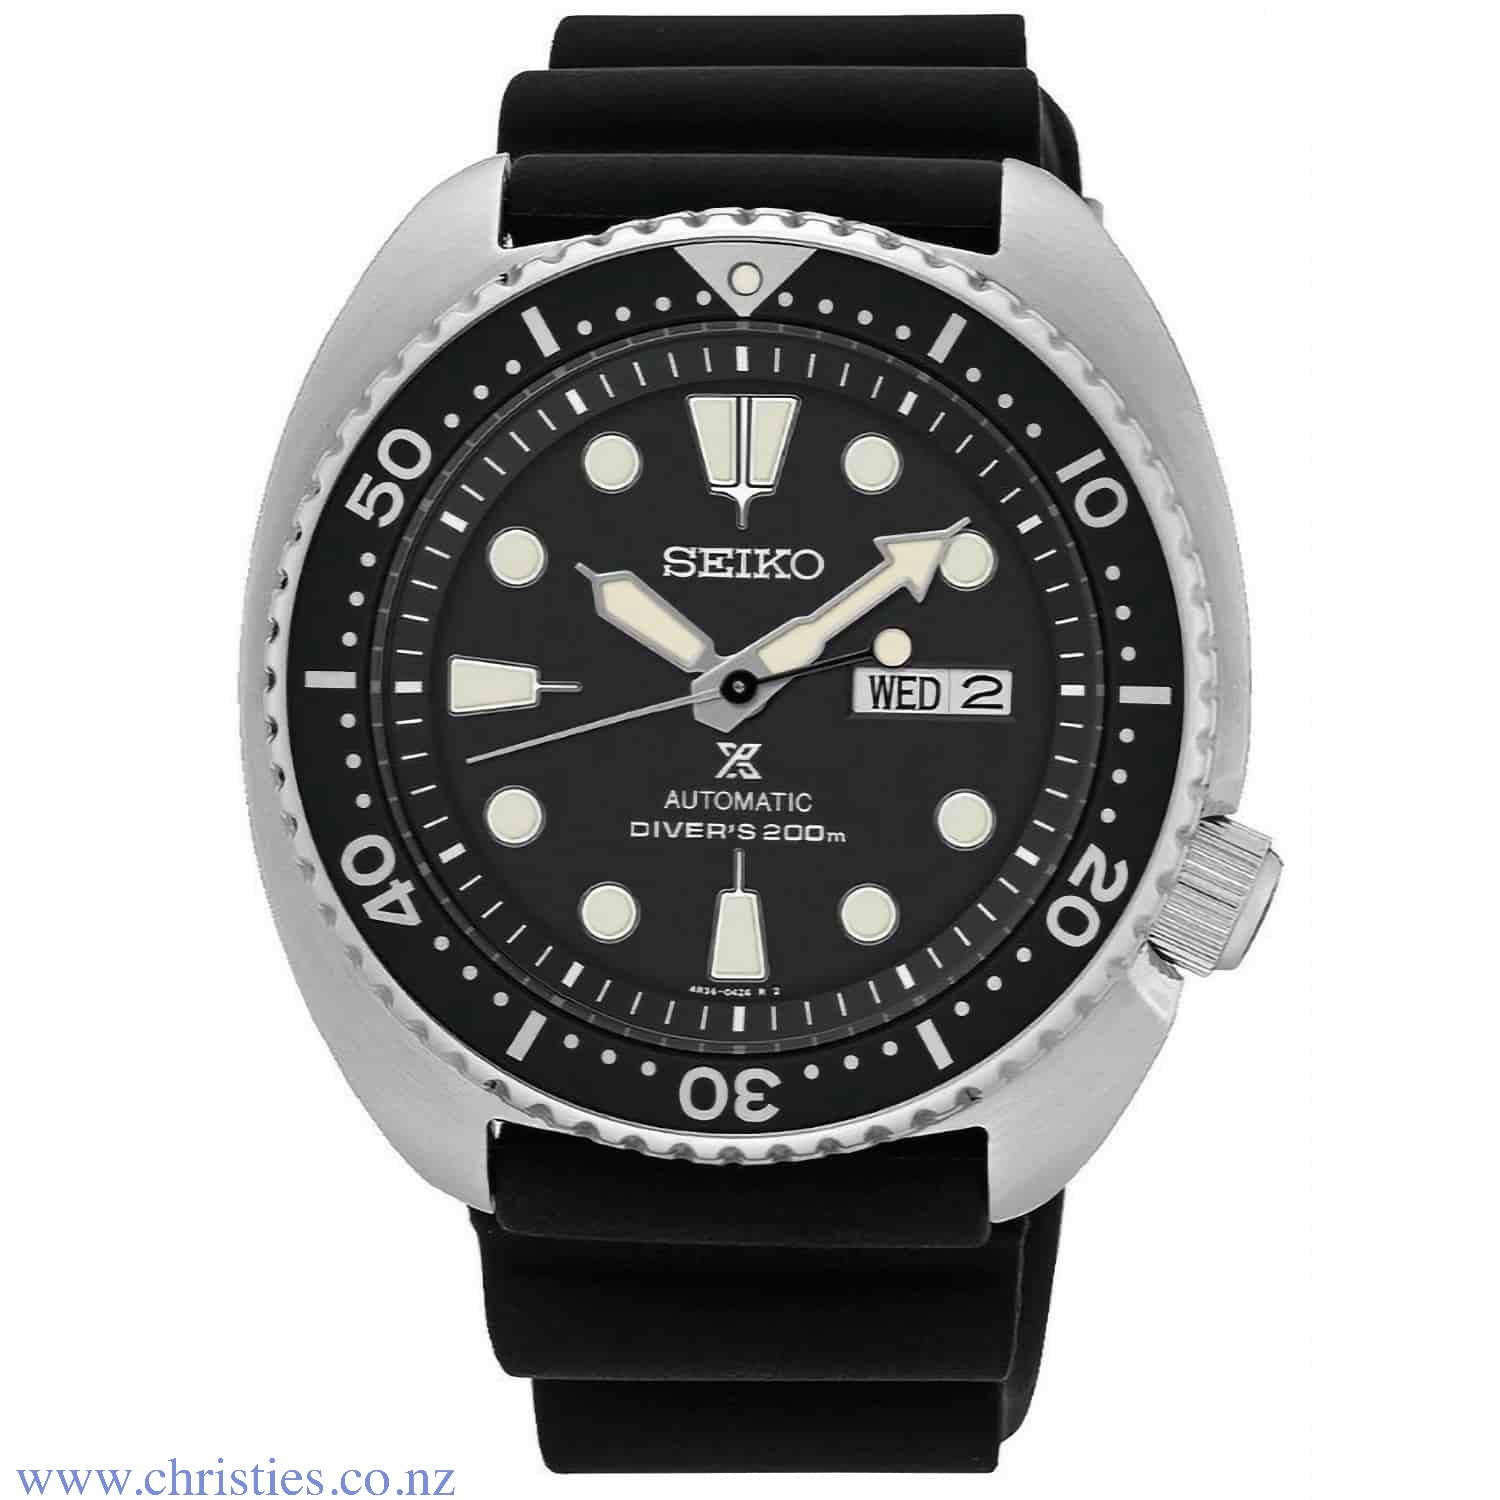 SRPE93K Seiko Prospex Turtle Automatic Divers Watch. Seiko Stainless Steel Dive watch featuring a rotating bezel and is solar powered Humm -Buy Little things up to $1000 and choose 10 weekly or 5 fortnightly payments with no interest. Late payment fee of 